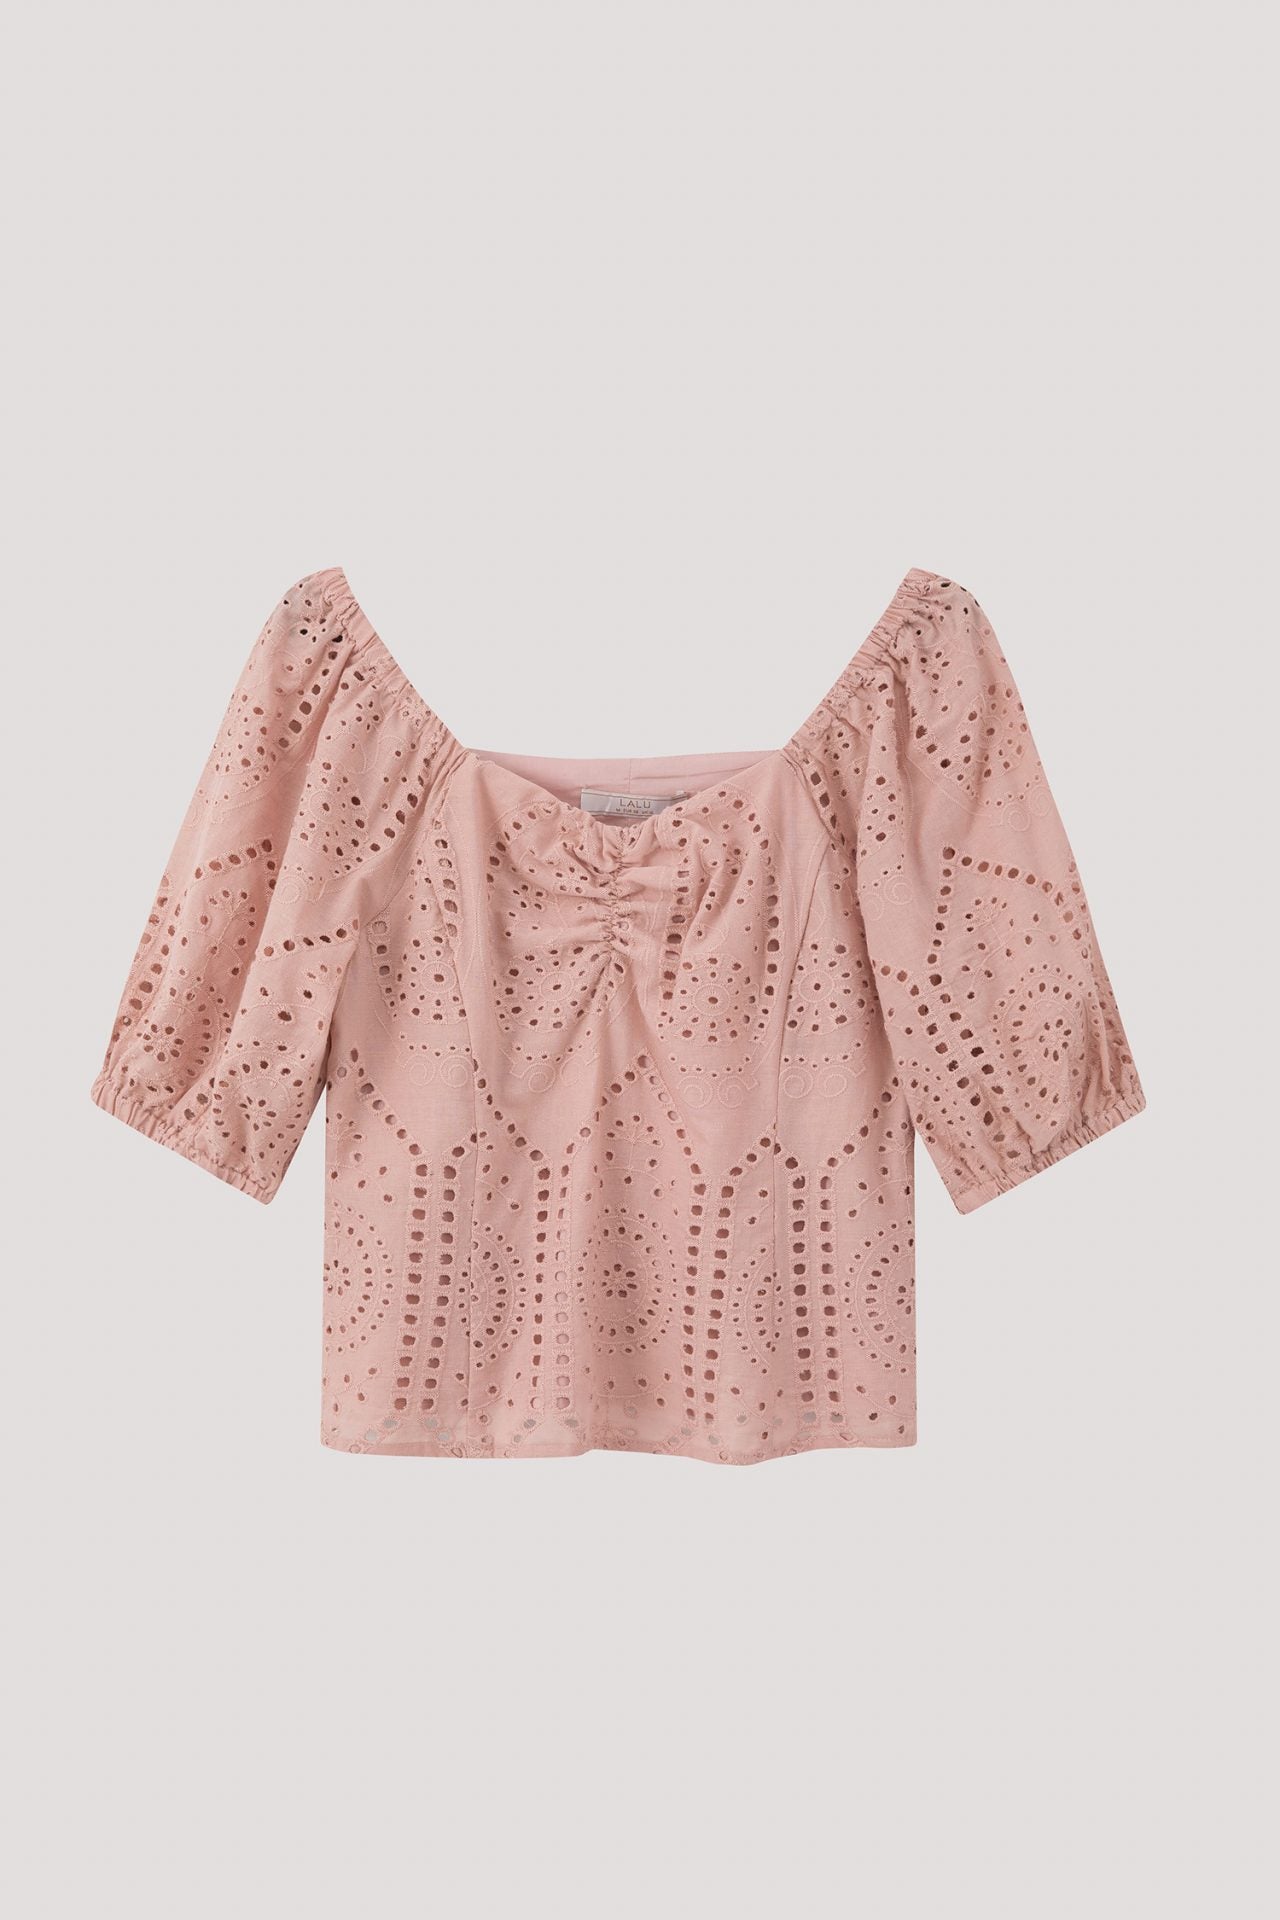 BB 9595 LACED PUFFED SLEEVES BLOUSE BLUSH